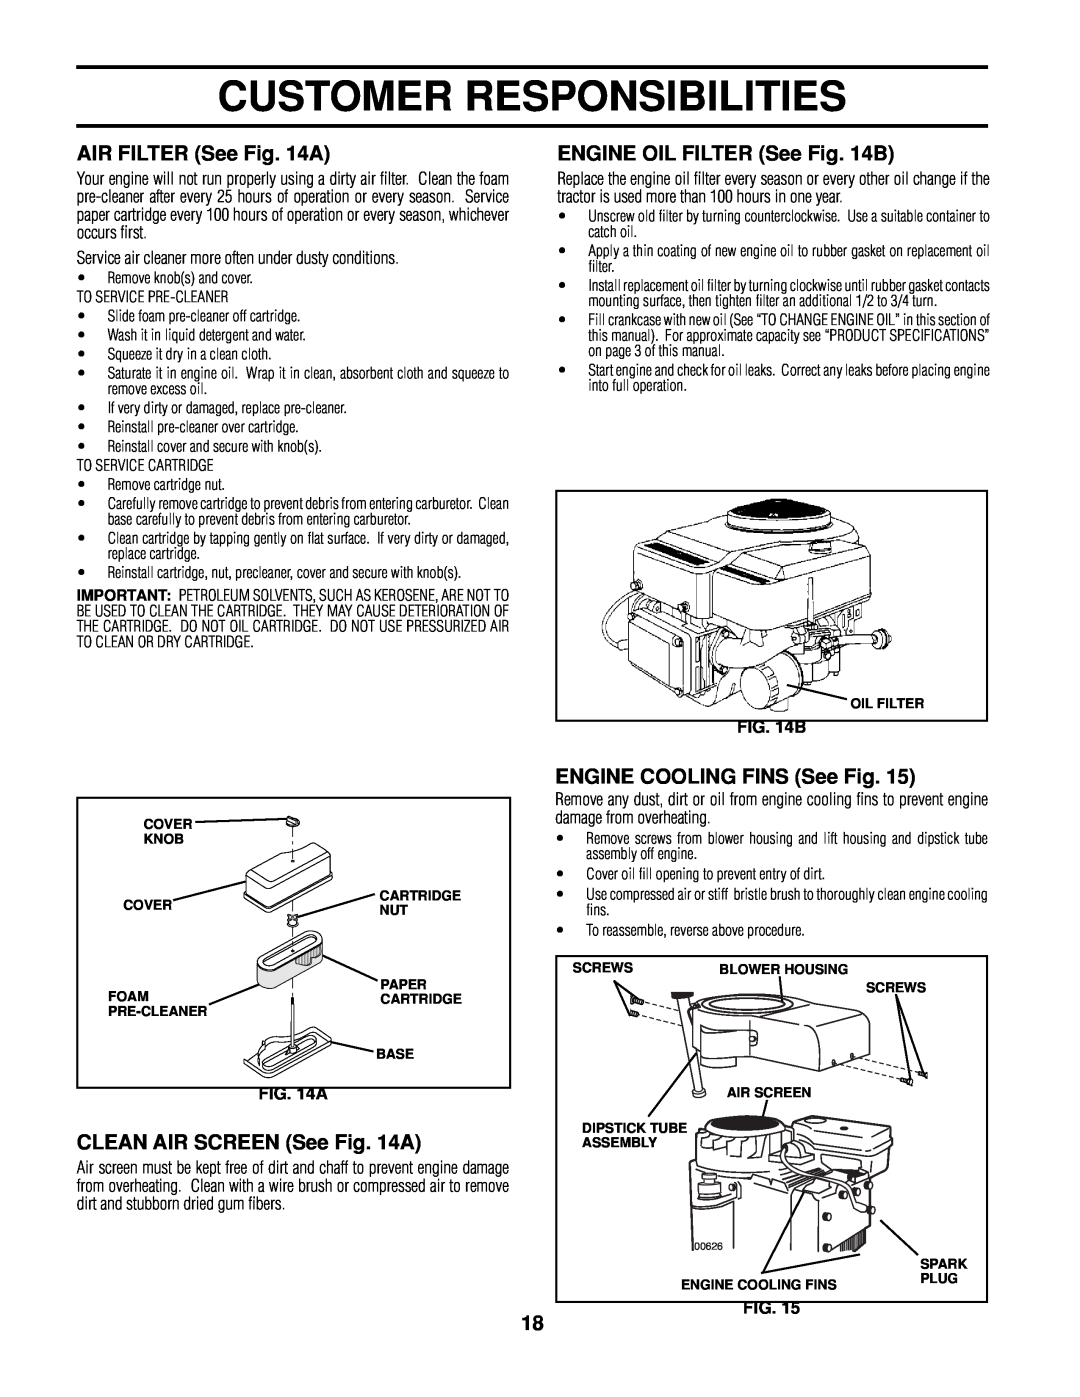 Poulan 161608 owner manual Customer Responsibilities, AIR FILTER See A, ENGINE OIL FILTER See B, CLEAN AIR SCREEN See A 